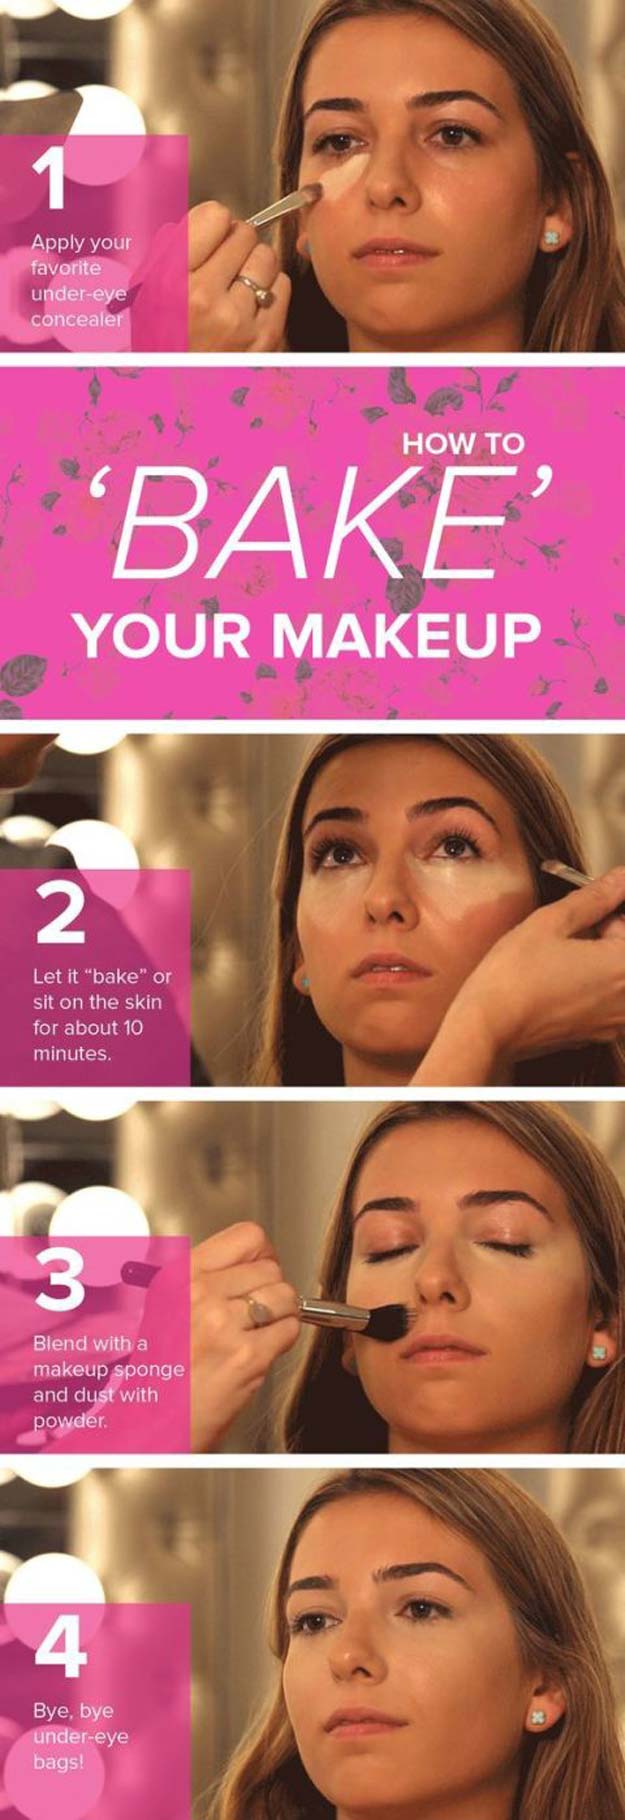 Looking for the best makeup baking tutorials you can try at home? We cover the hottest trends and the latest techniques for makeup baking.